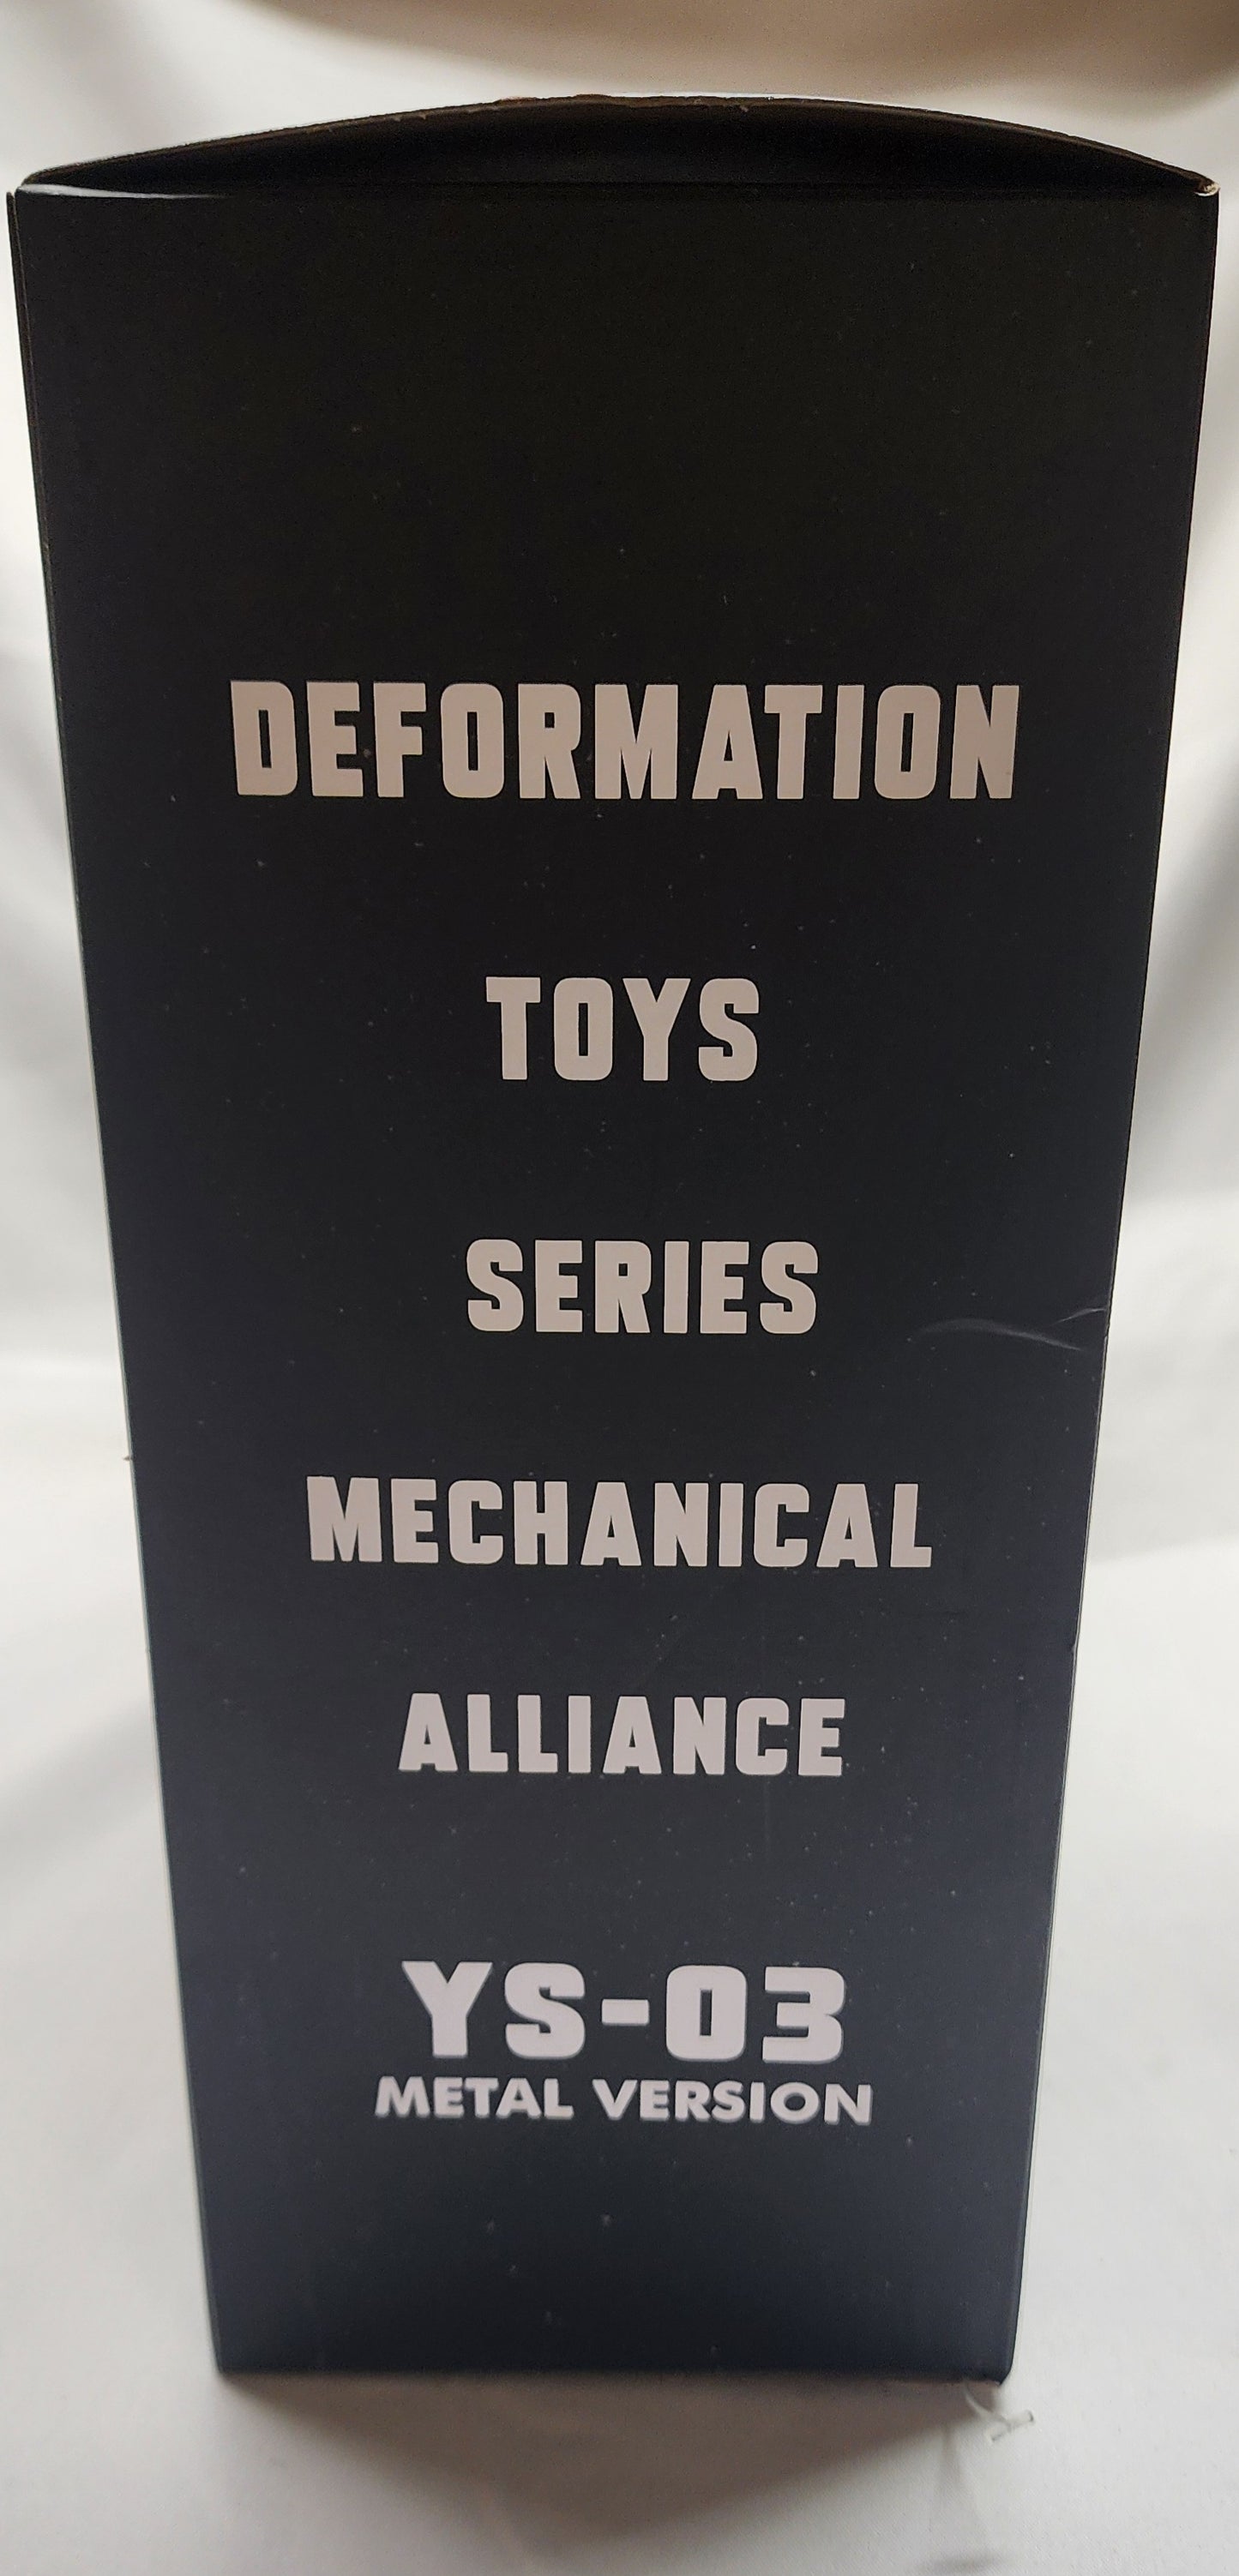 Deformation Toys Series Mechanical Alliance YS-03 Metal Version.  Box has been opened, but Bumblebee hasn't been removed.